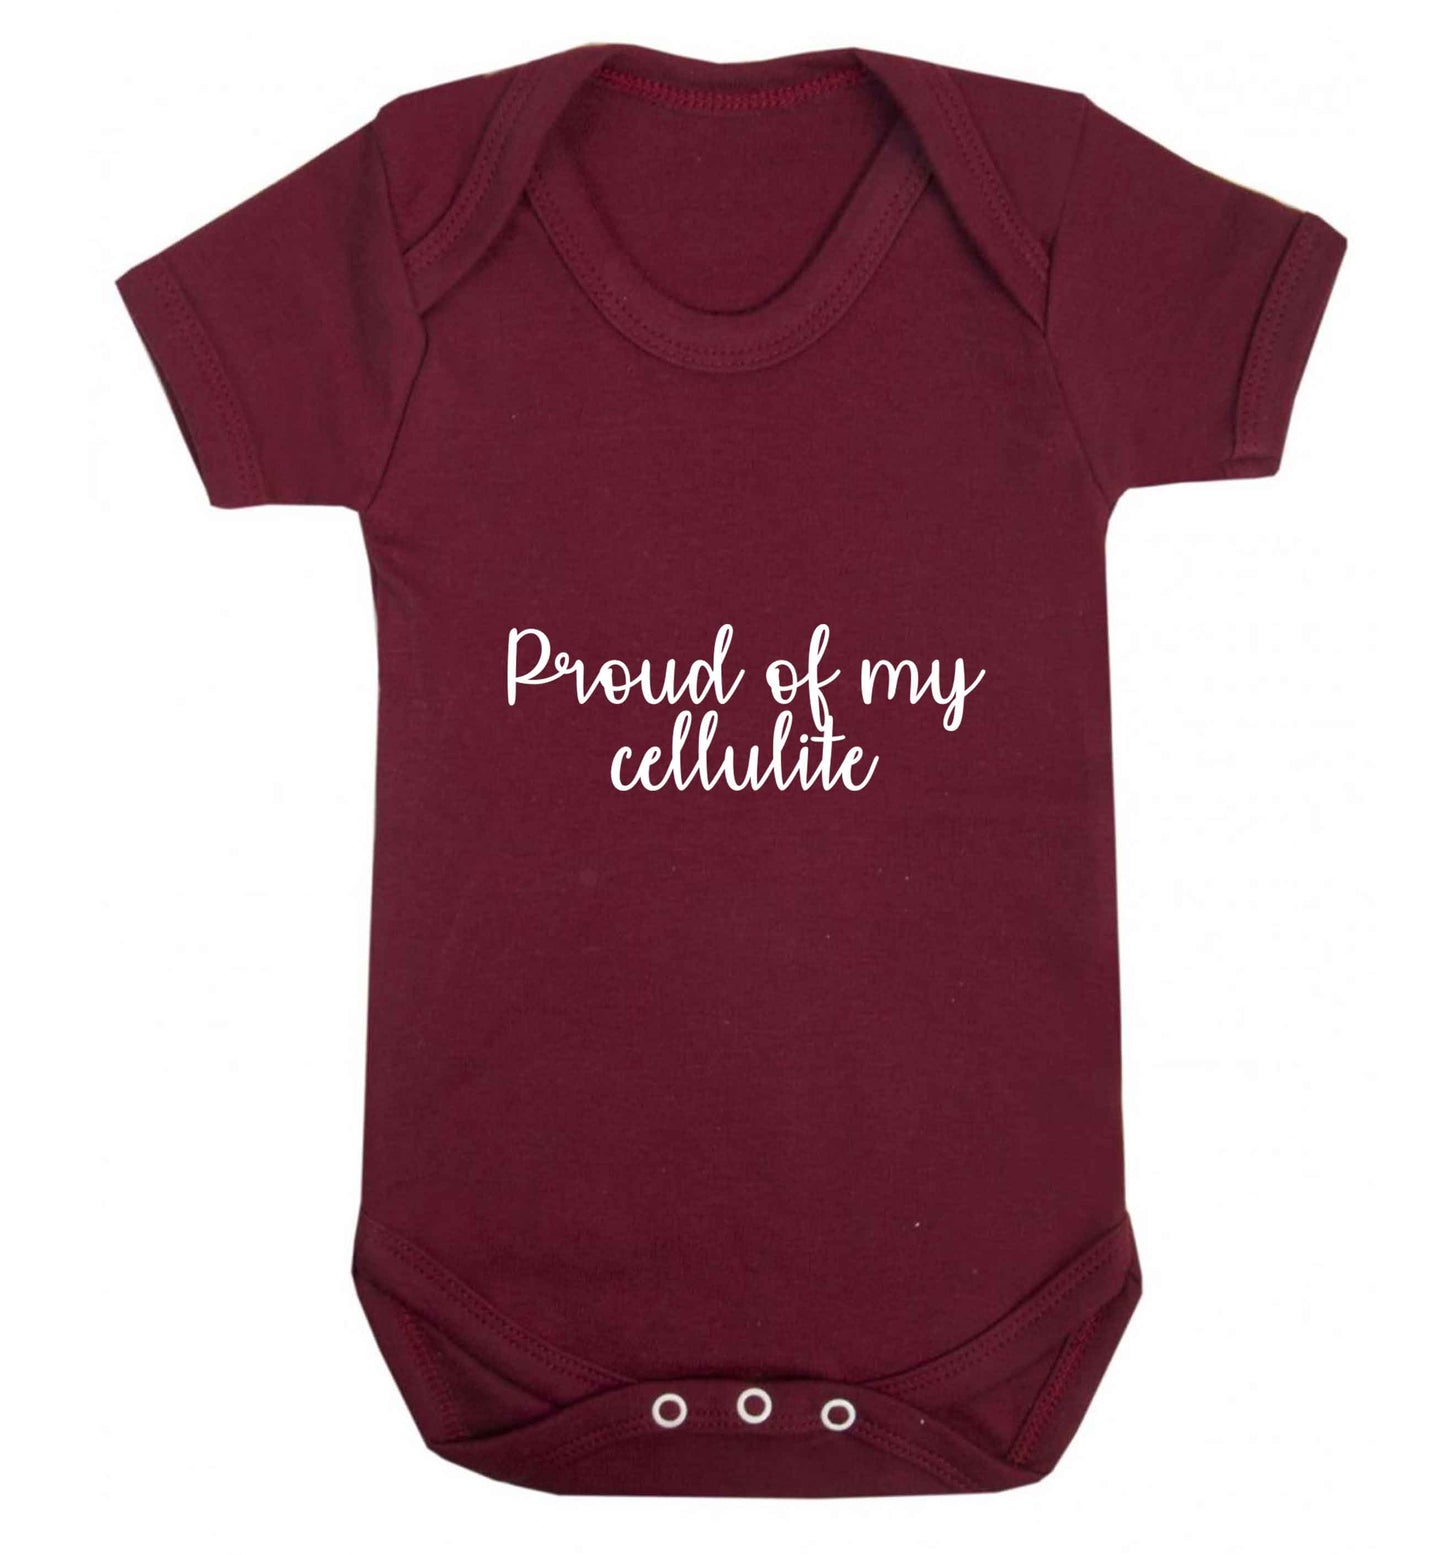 Proud of my cellulite baby vest maroon 18-24 months